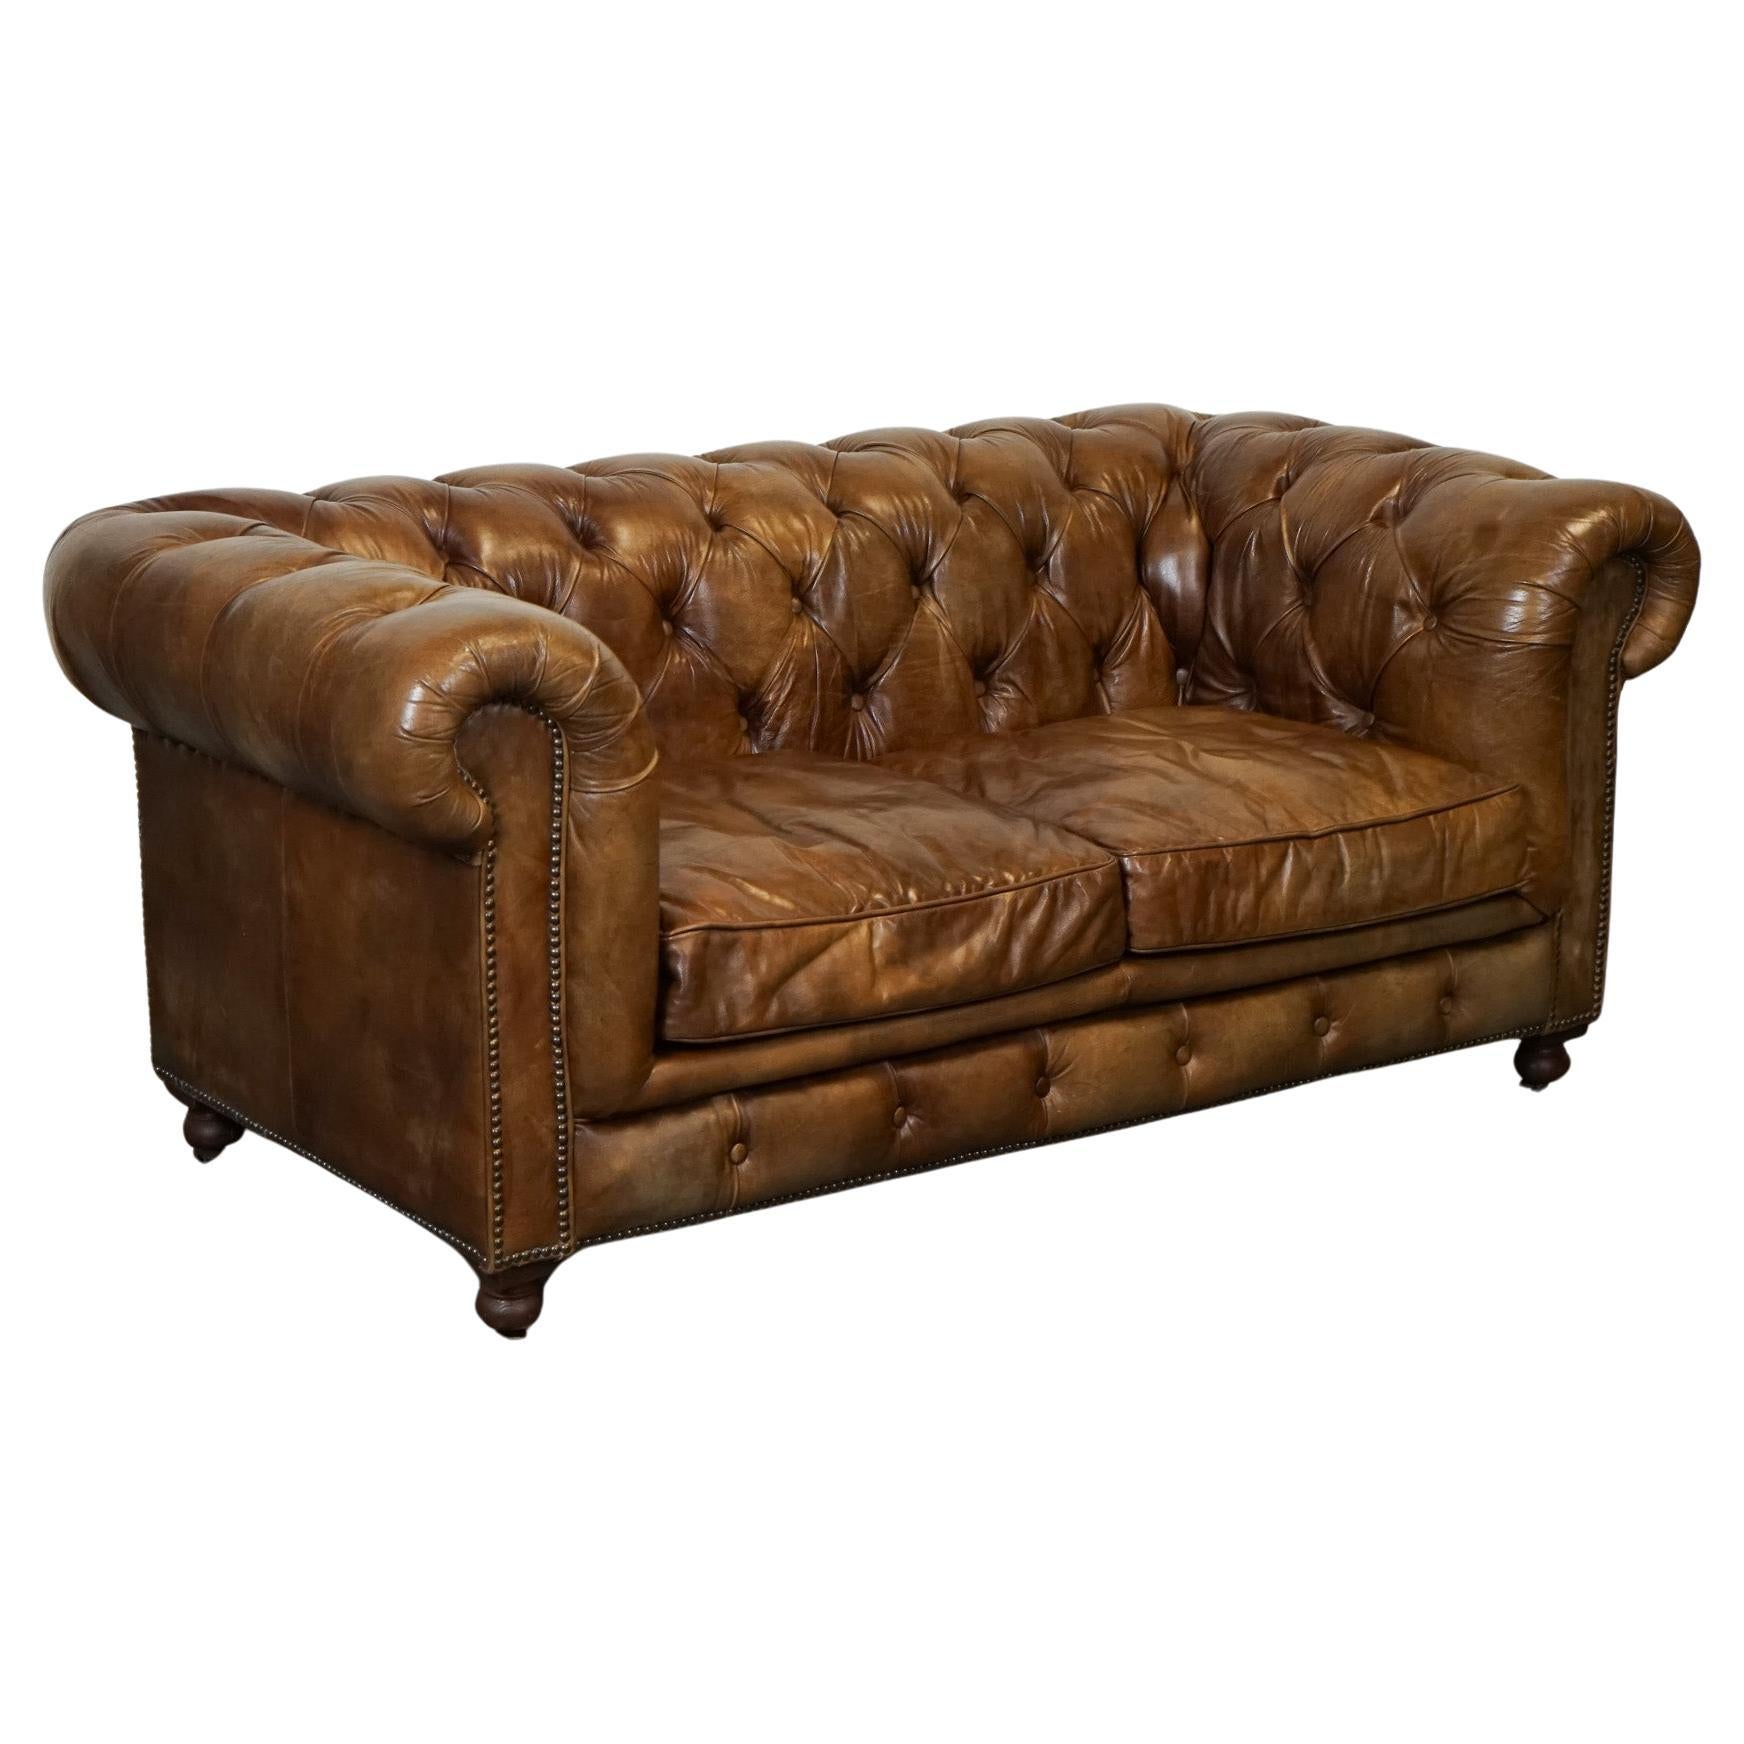 SCHÖNE TIMOTHY OULTON CHESTERFIELD SOFA BY HALO HERiTAGE BROWN LEATHER J1